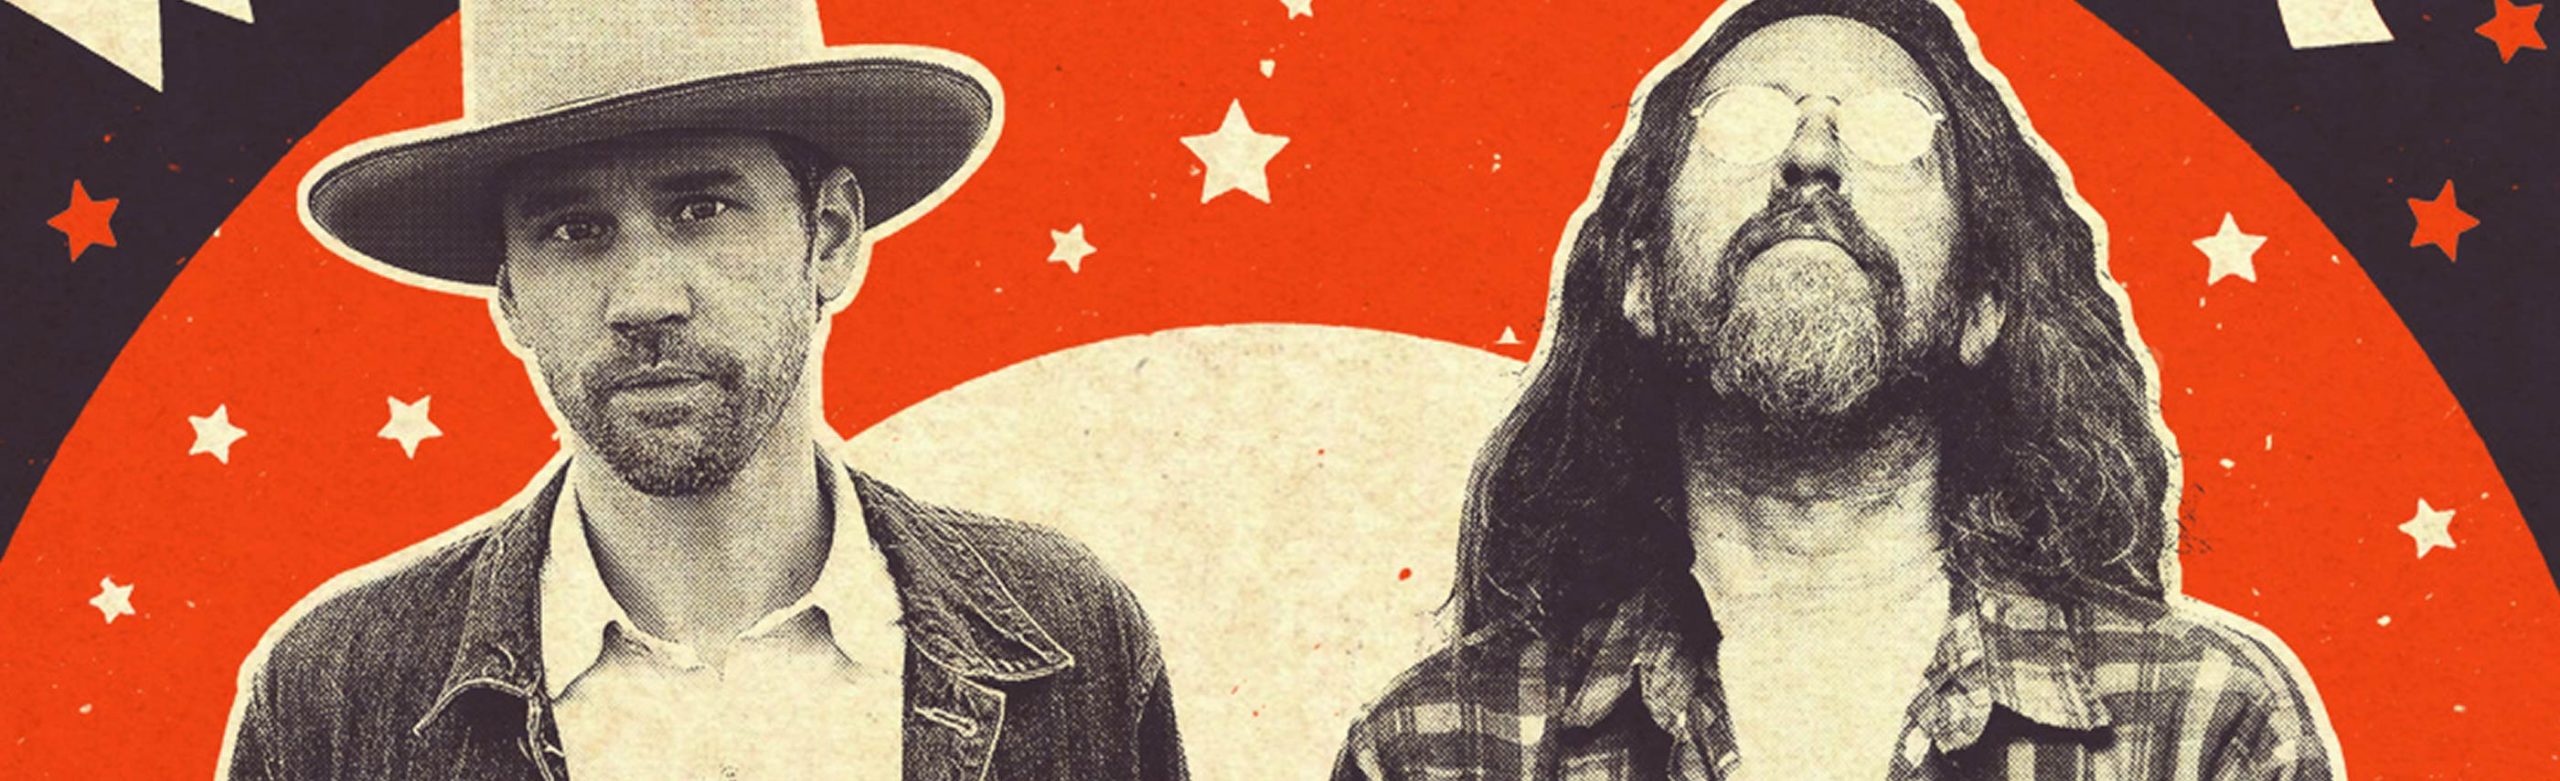 Charlie Parr and Willie Watson Ticket + Merch Giveaway Image